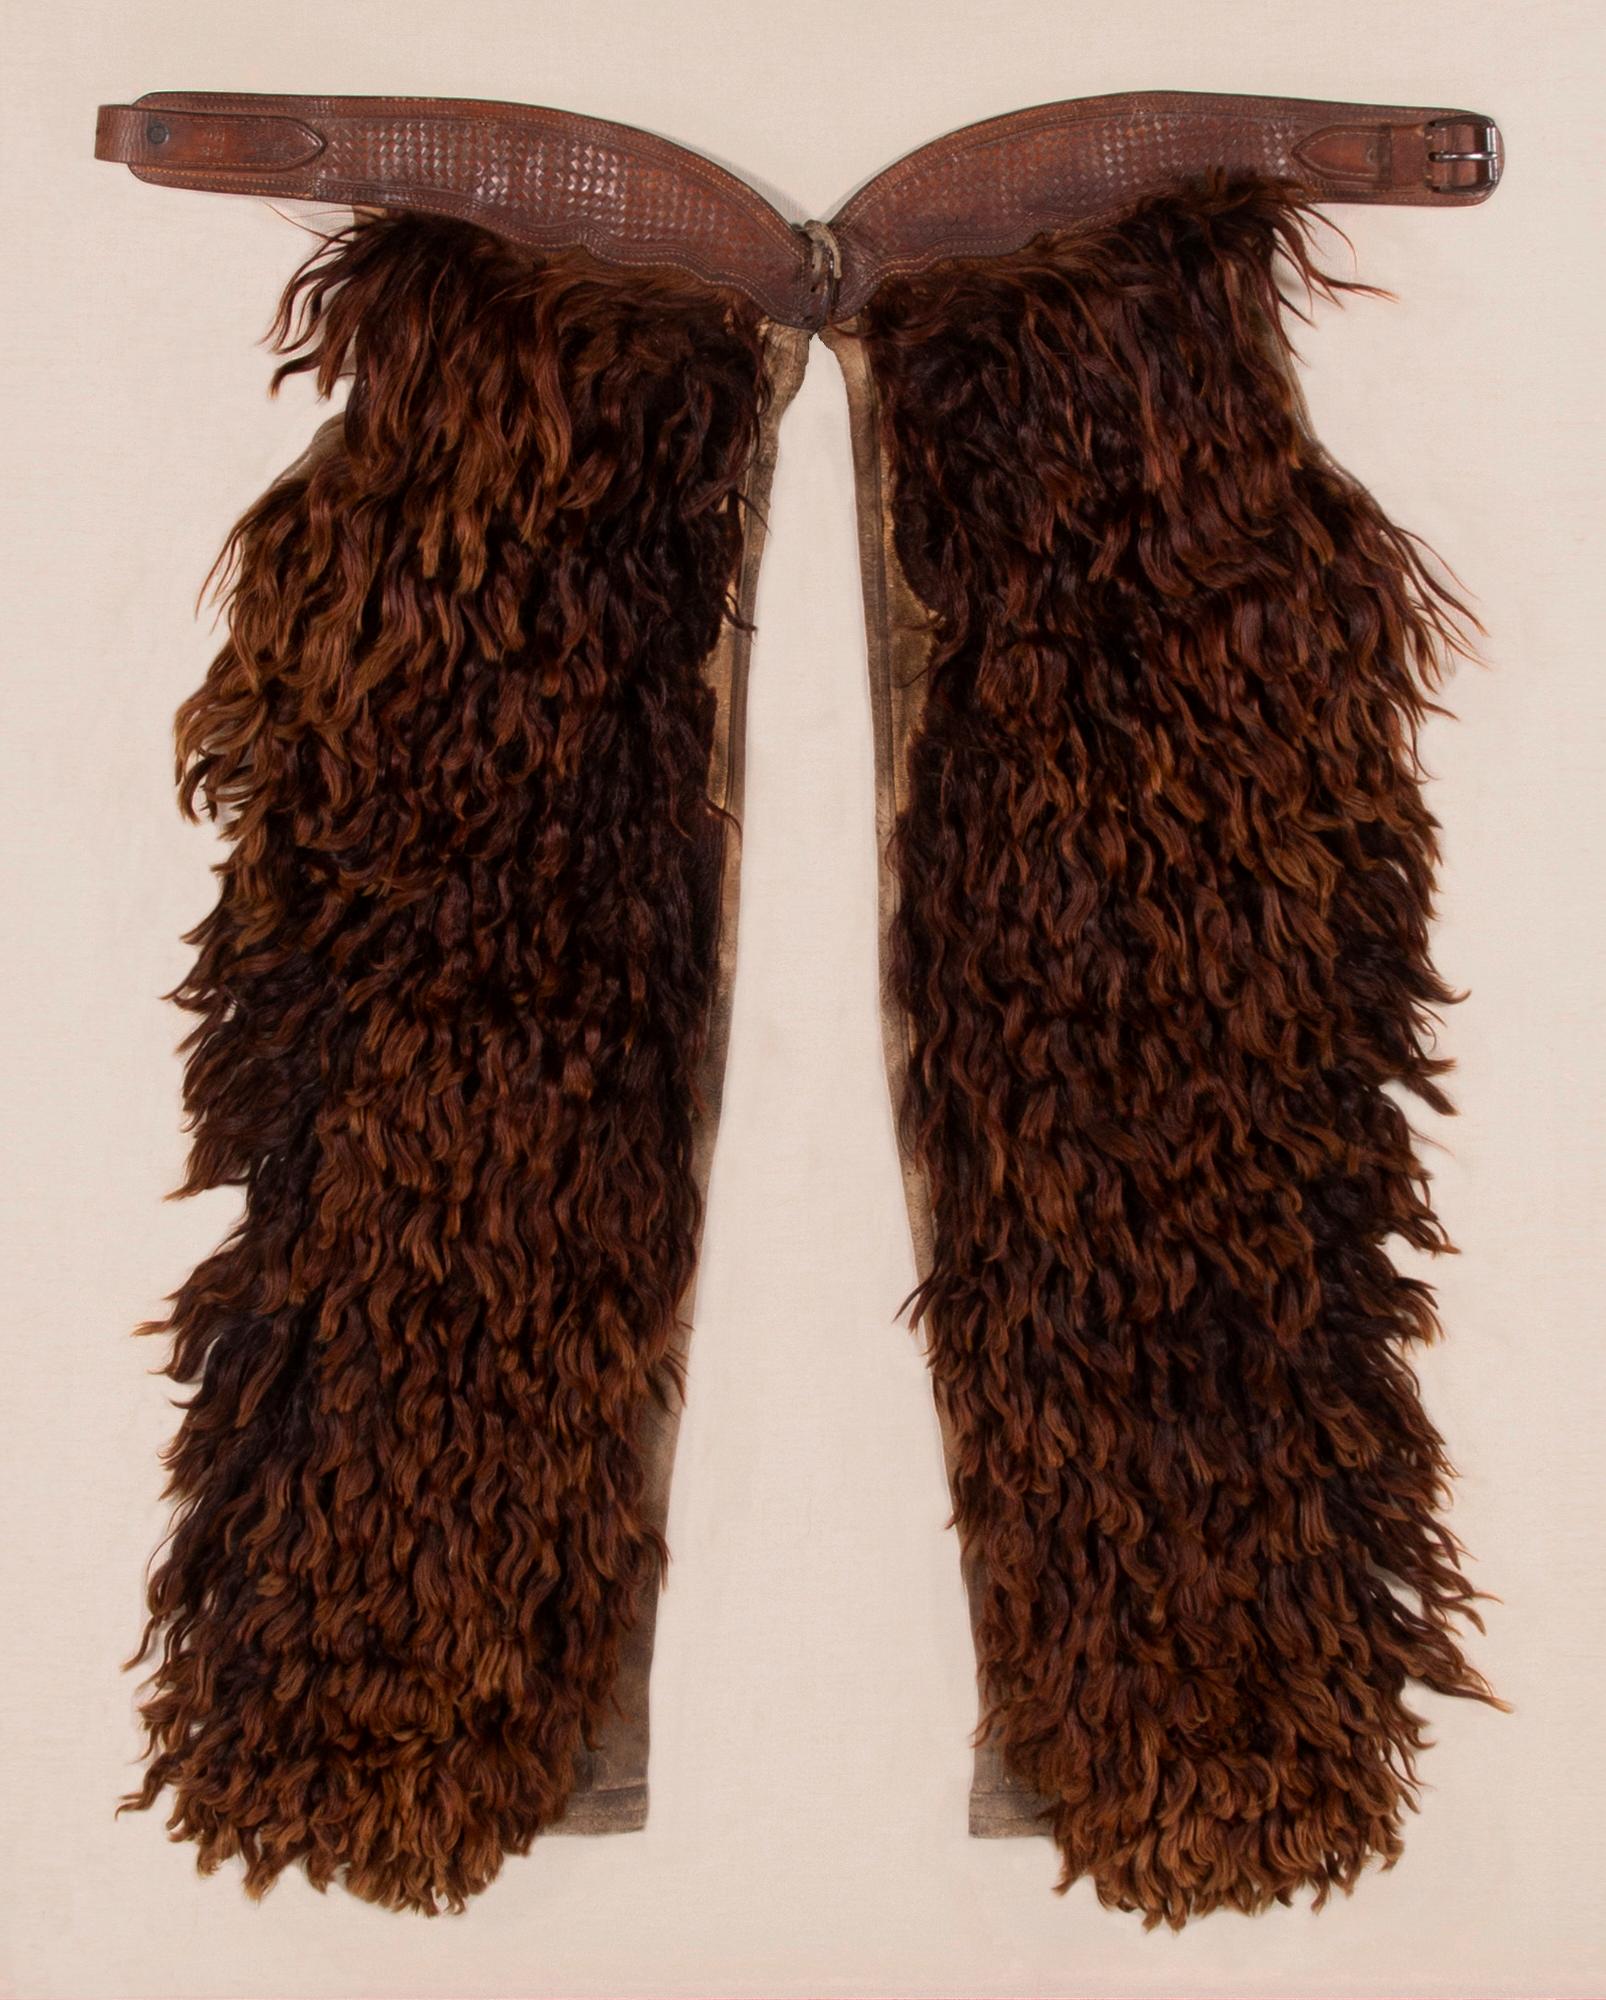 Wooly, angora chaps with beautifully tooled leather, made by the John Clark saddlery company of Portland, Oregon, signed, circa 1873-1929.

Wooly chaps made of leather and canvas, faced with dyed Angora, made by the John F. Clark Saddlery Company